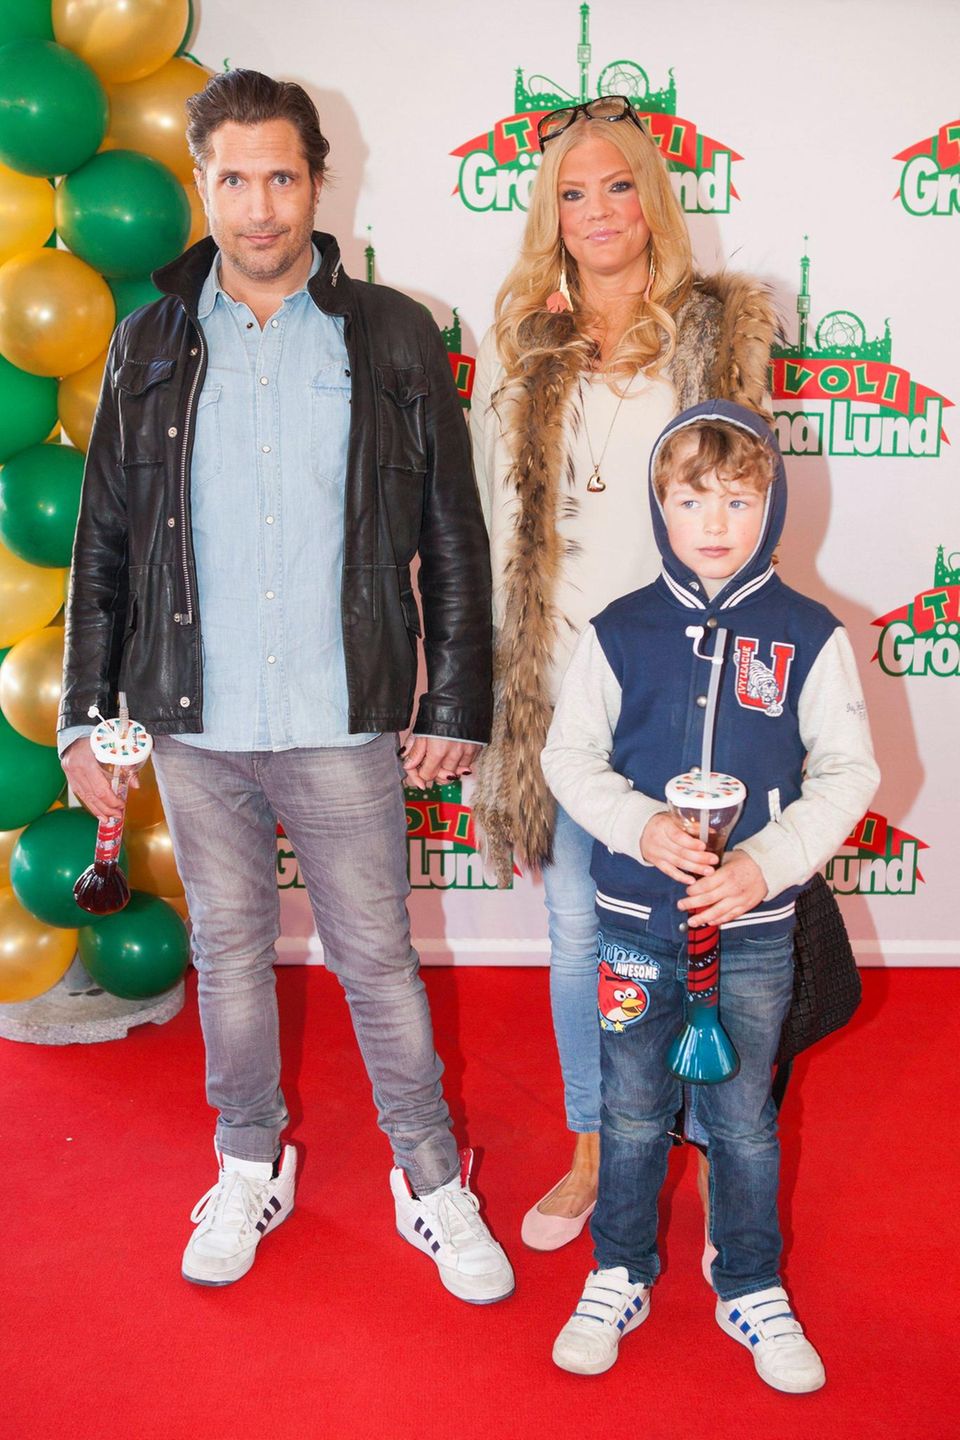 Daniel Collert started a family with nurse Josefine Davidson after dating Princess Victoria, here with son Jack at an event in 2014. 